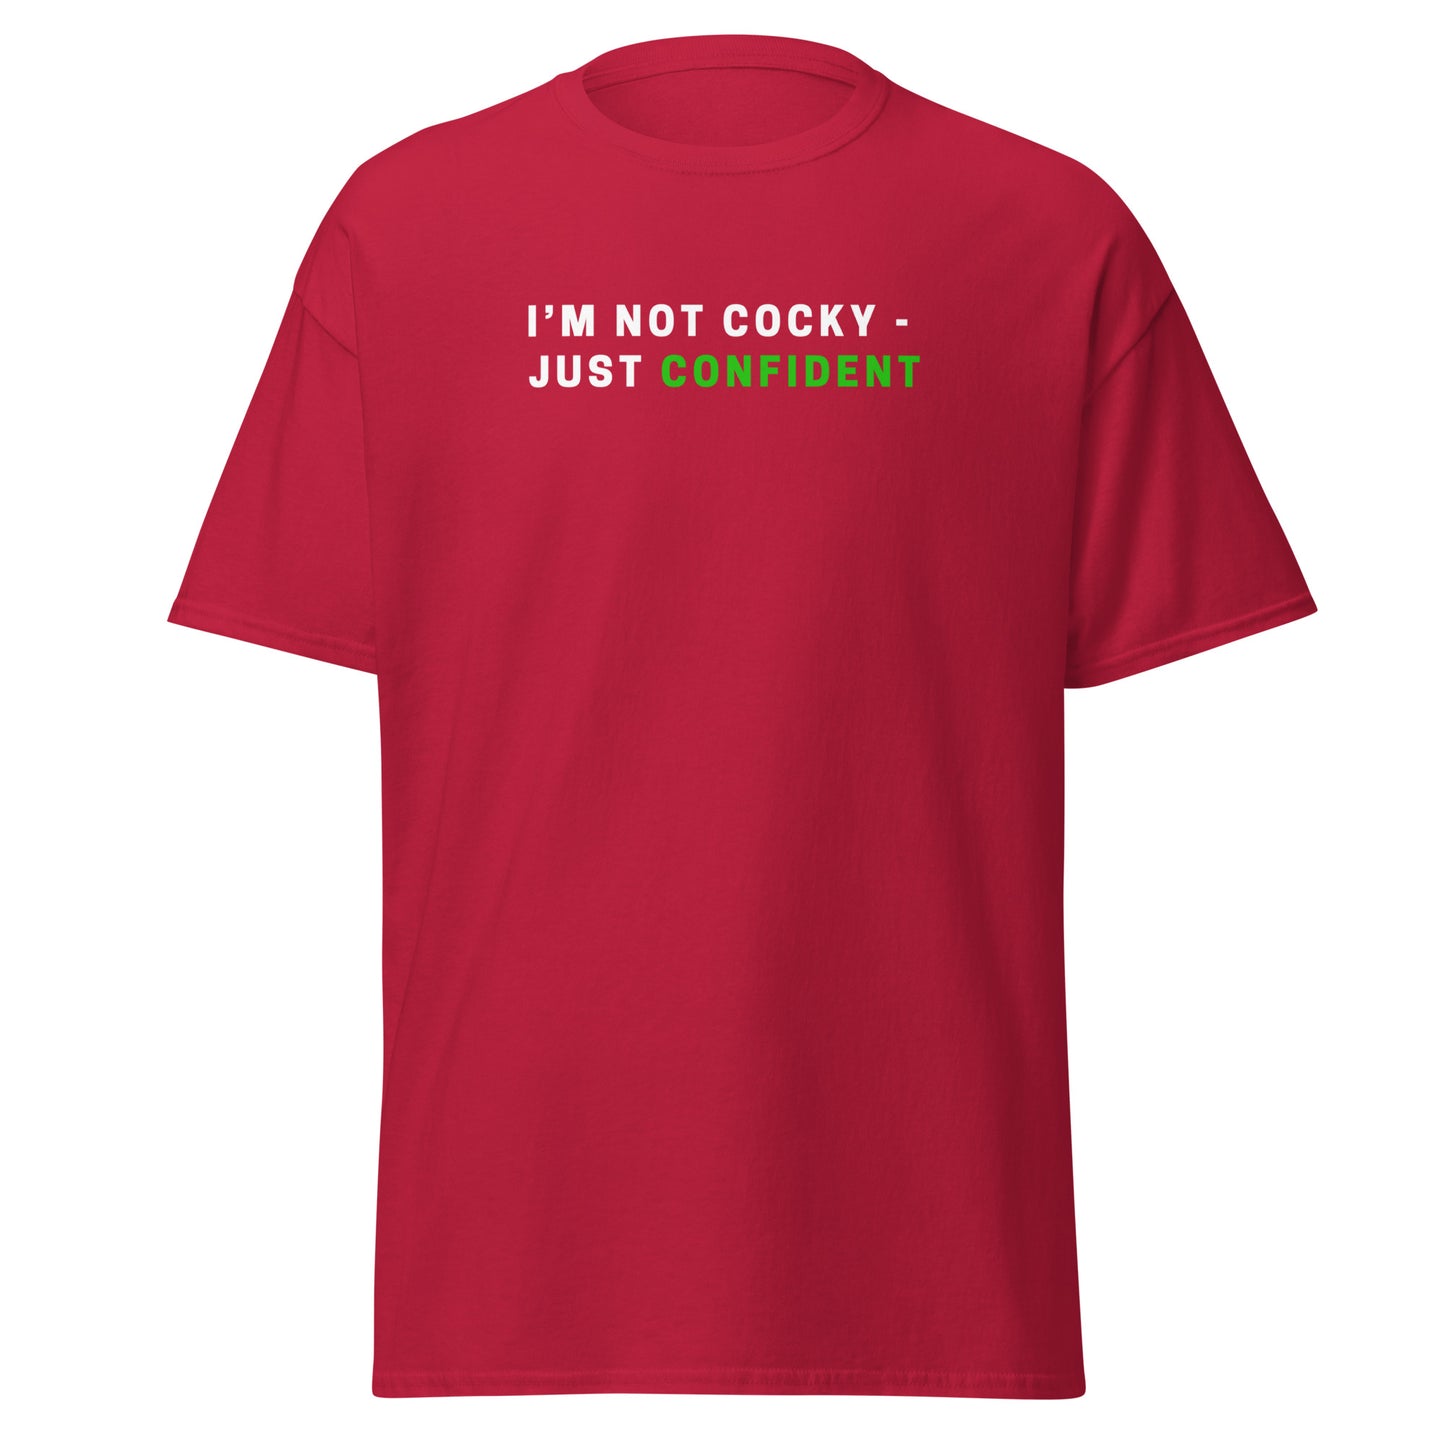 I’m not cocky tee